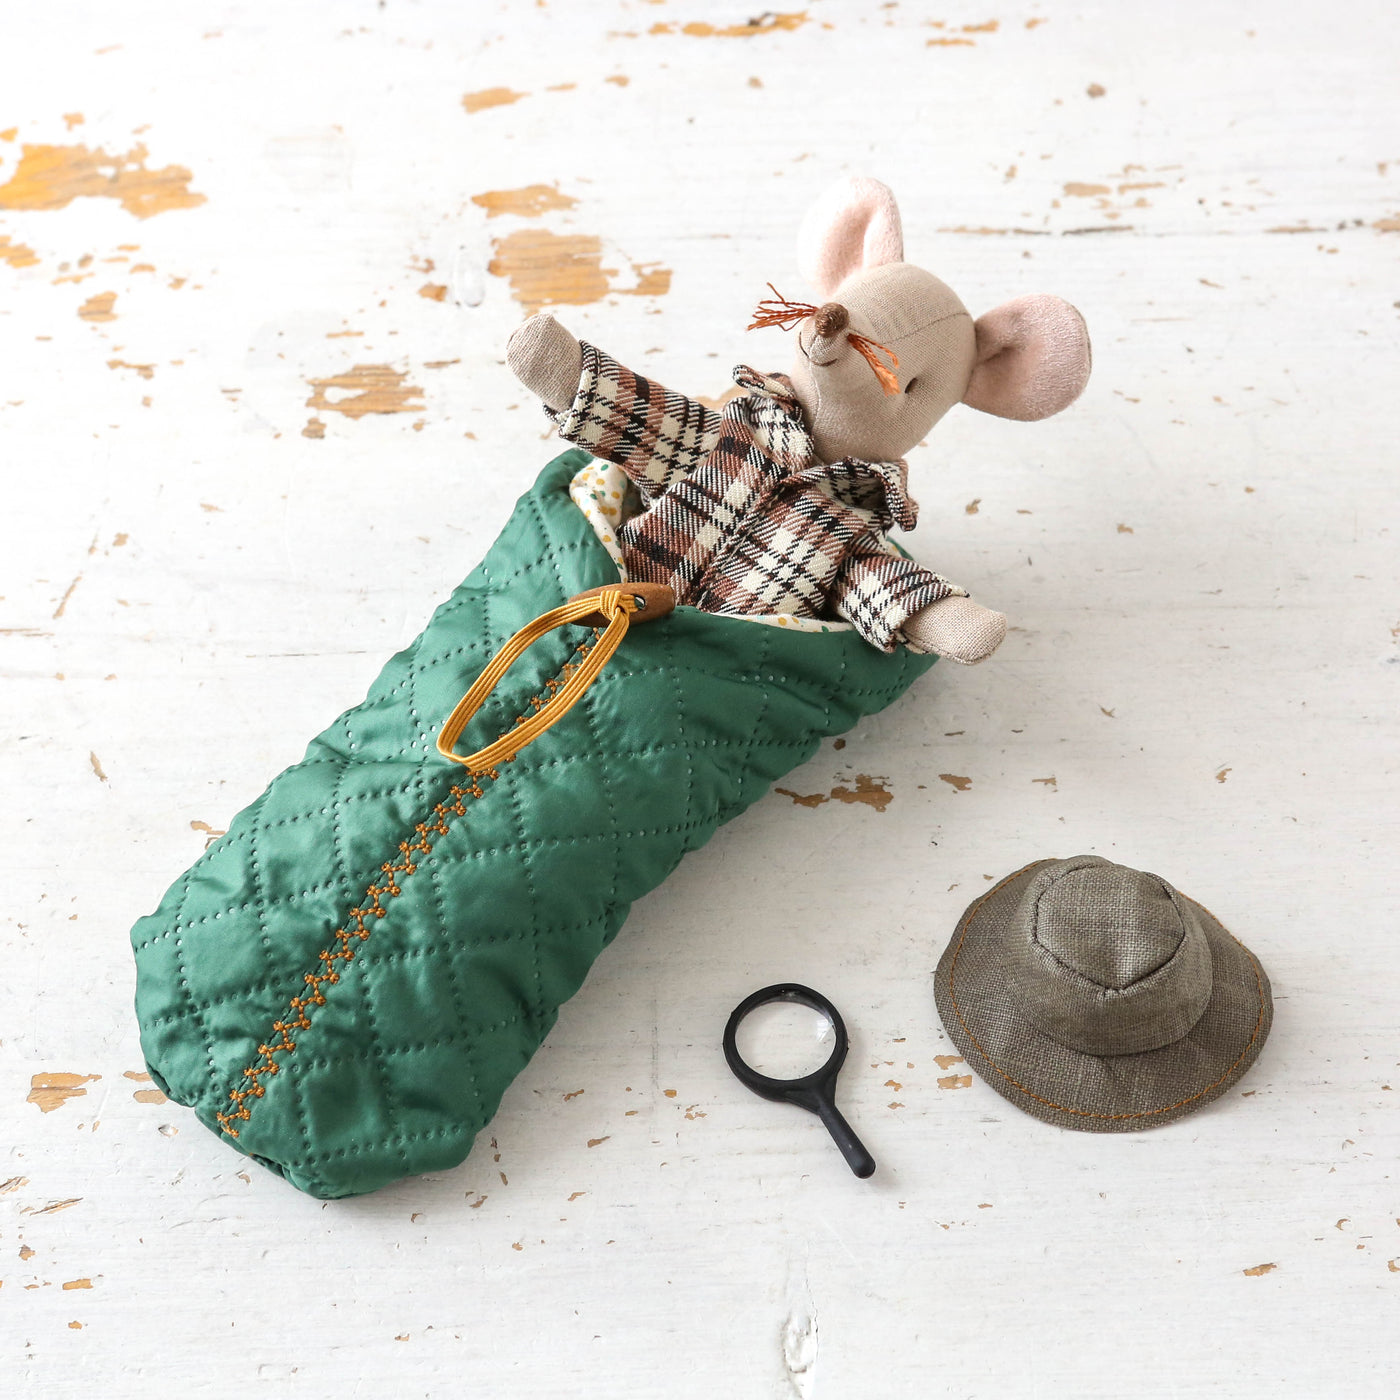 Wildlife Guide Mouse with Sleeping Bag